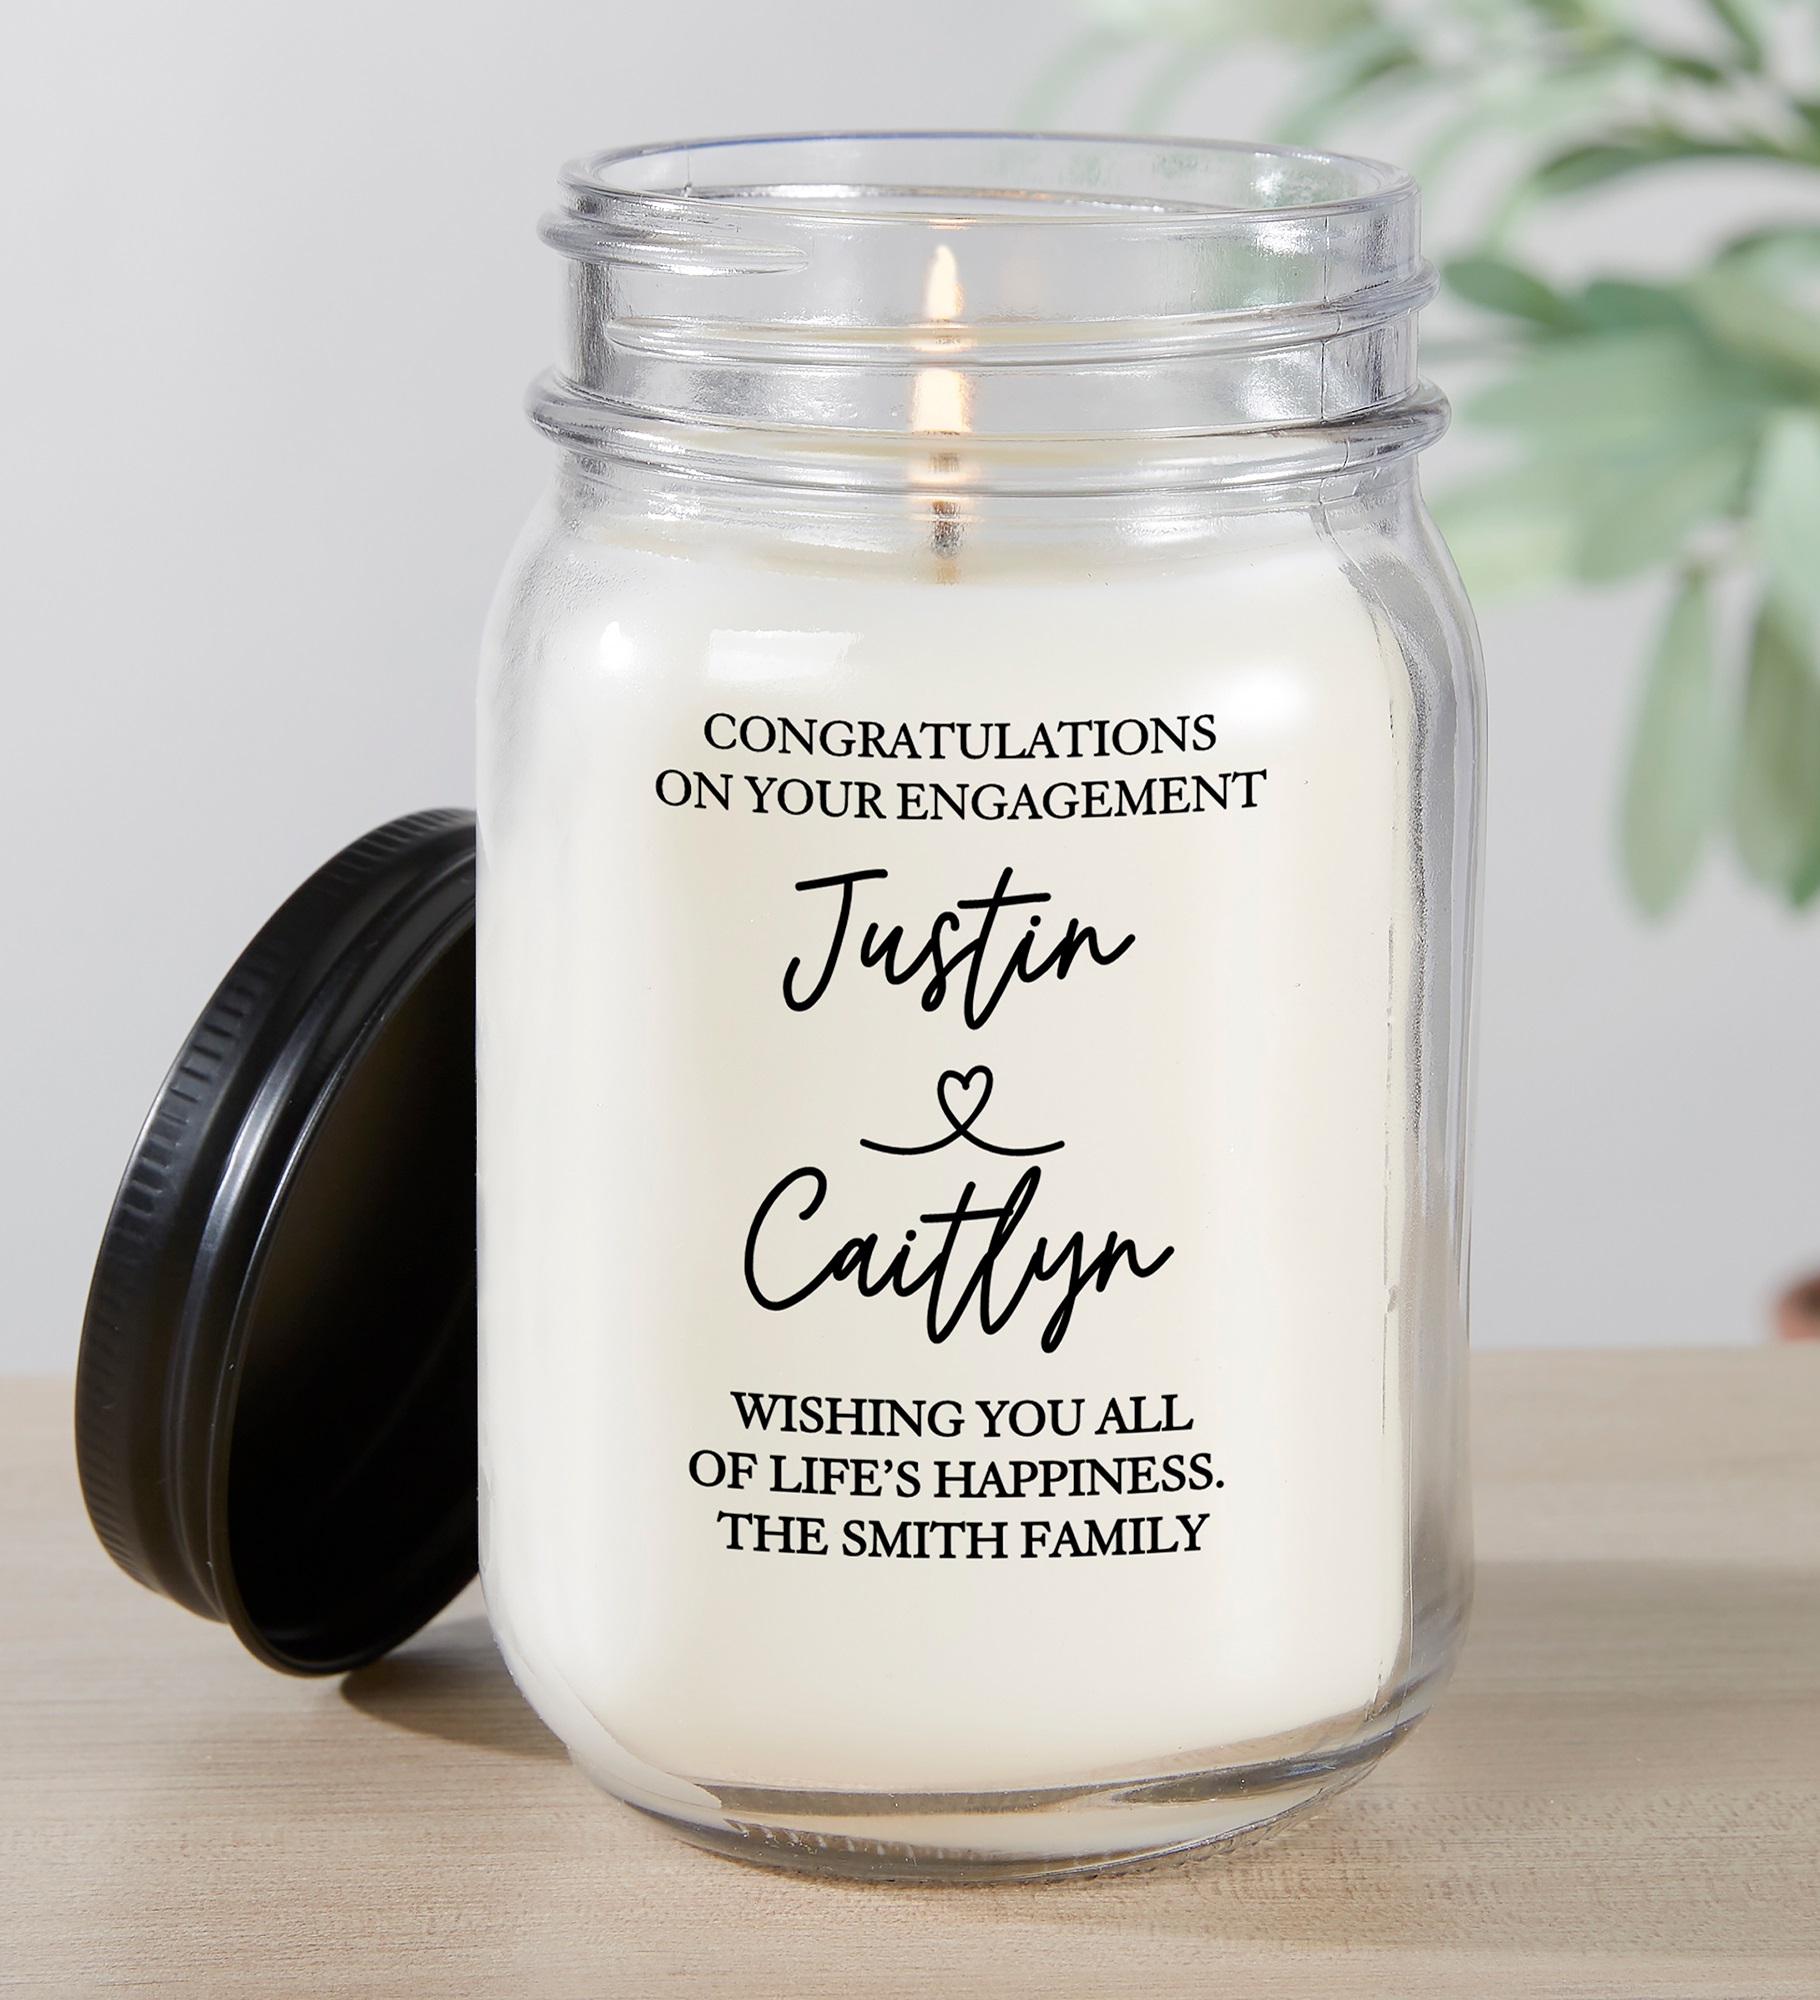 Drawn Together By Love Engagement Personalized Farmhouse Candle Jar